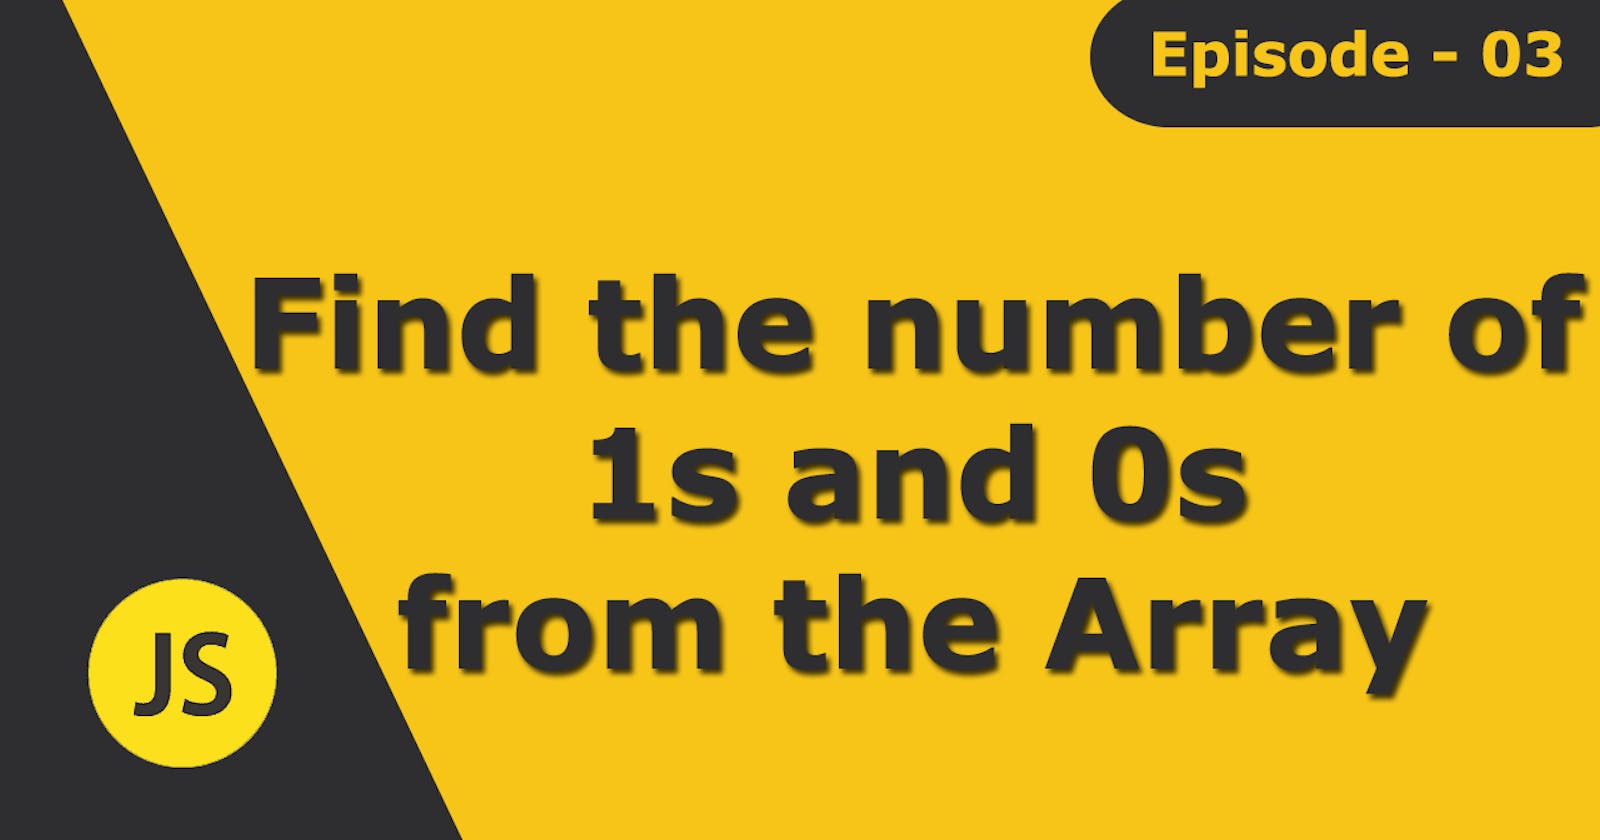 Episode 03 - Find the number of 1s and 0s from the array